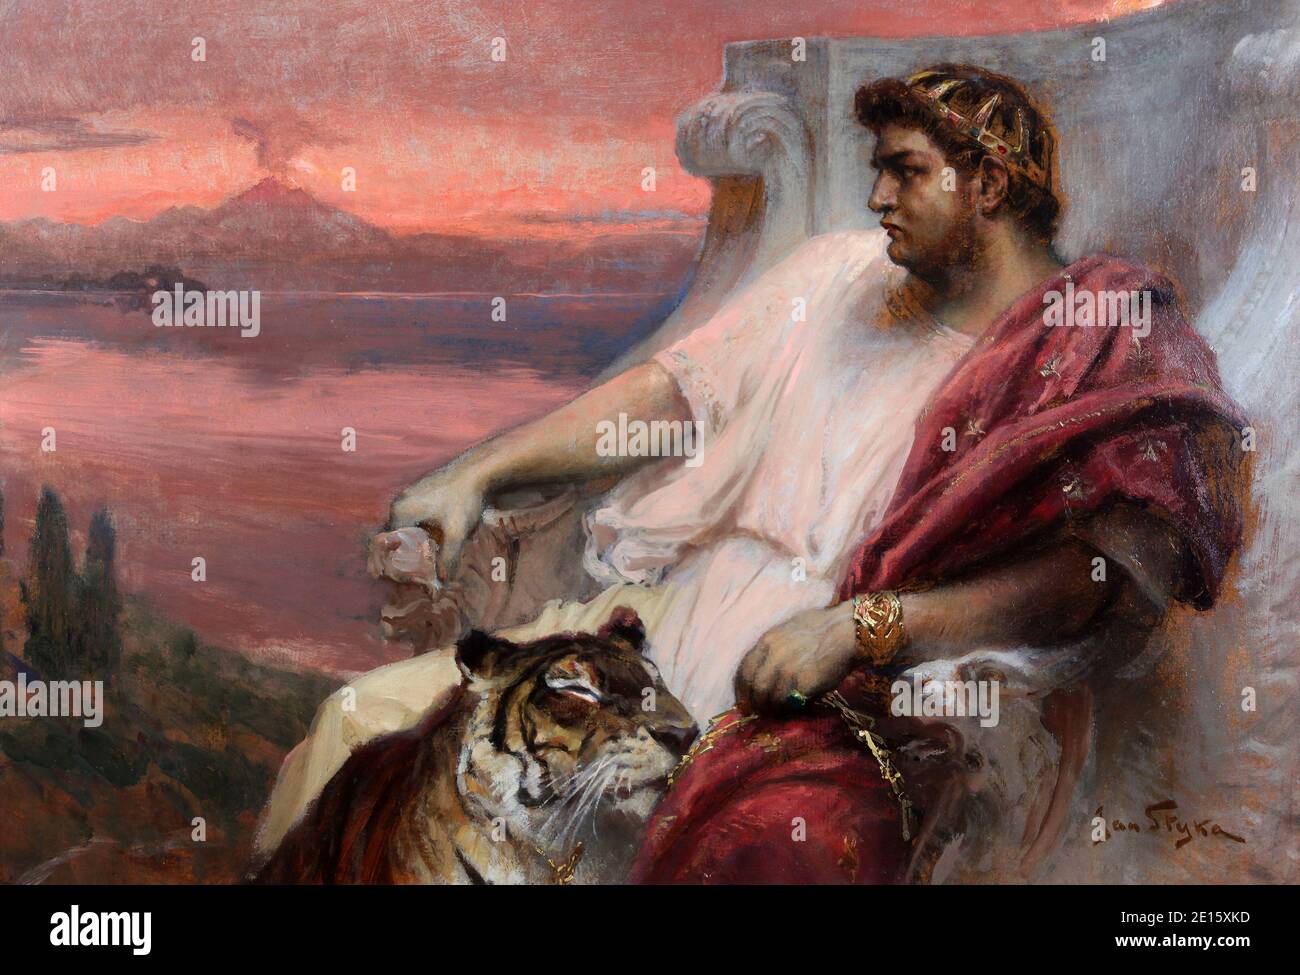 'Nero in Baia' painted by Jan Styka is presented at the exhibit 'Nerone', examining the life and dark legends of Emperor Nero (37-68 AD), which opens in Rome ,Italy on April 12, 2011 across five different landmarks of the ancient imperial capital. Nero has been infamous throughout history for tyranny, extravagance, cold-blooded murder, and cruel persecution of Christians. Ancient Roman historians accused him of killing his mother, stepbrother and two wives, and of burning Christians at night in his garden for firelight. He was known as the emperor 'who fiddled while Rome burned', although fidd Stock Photo